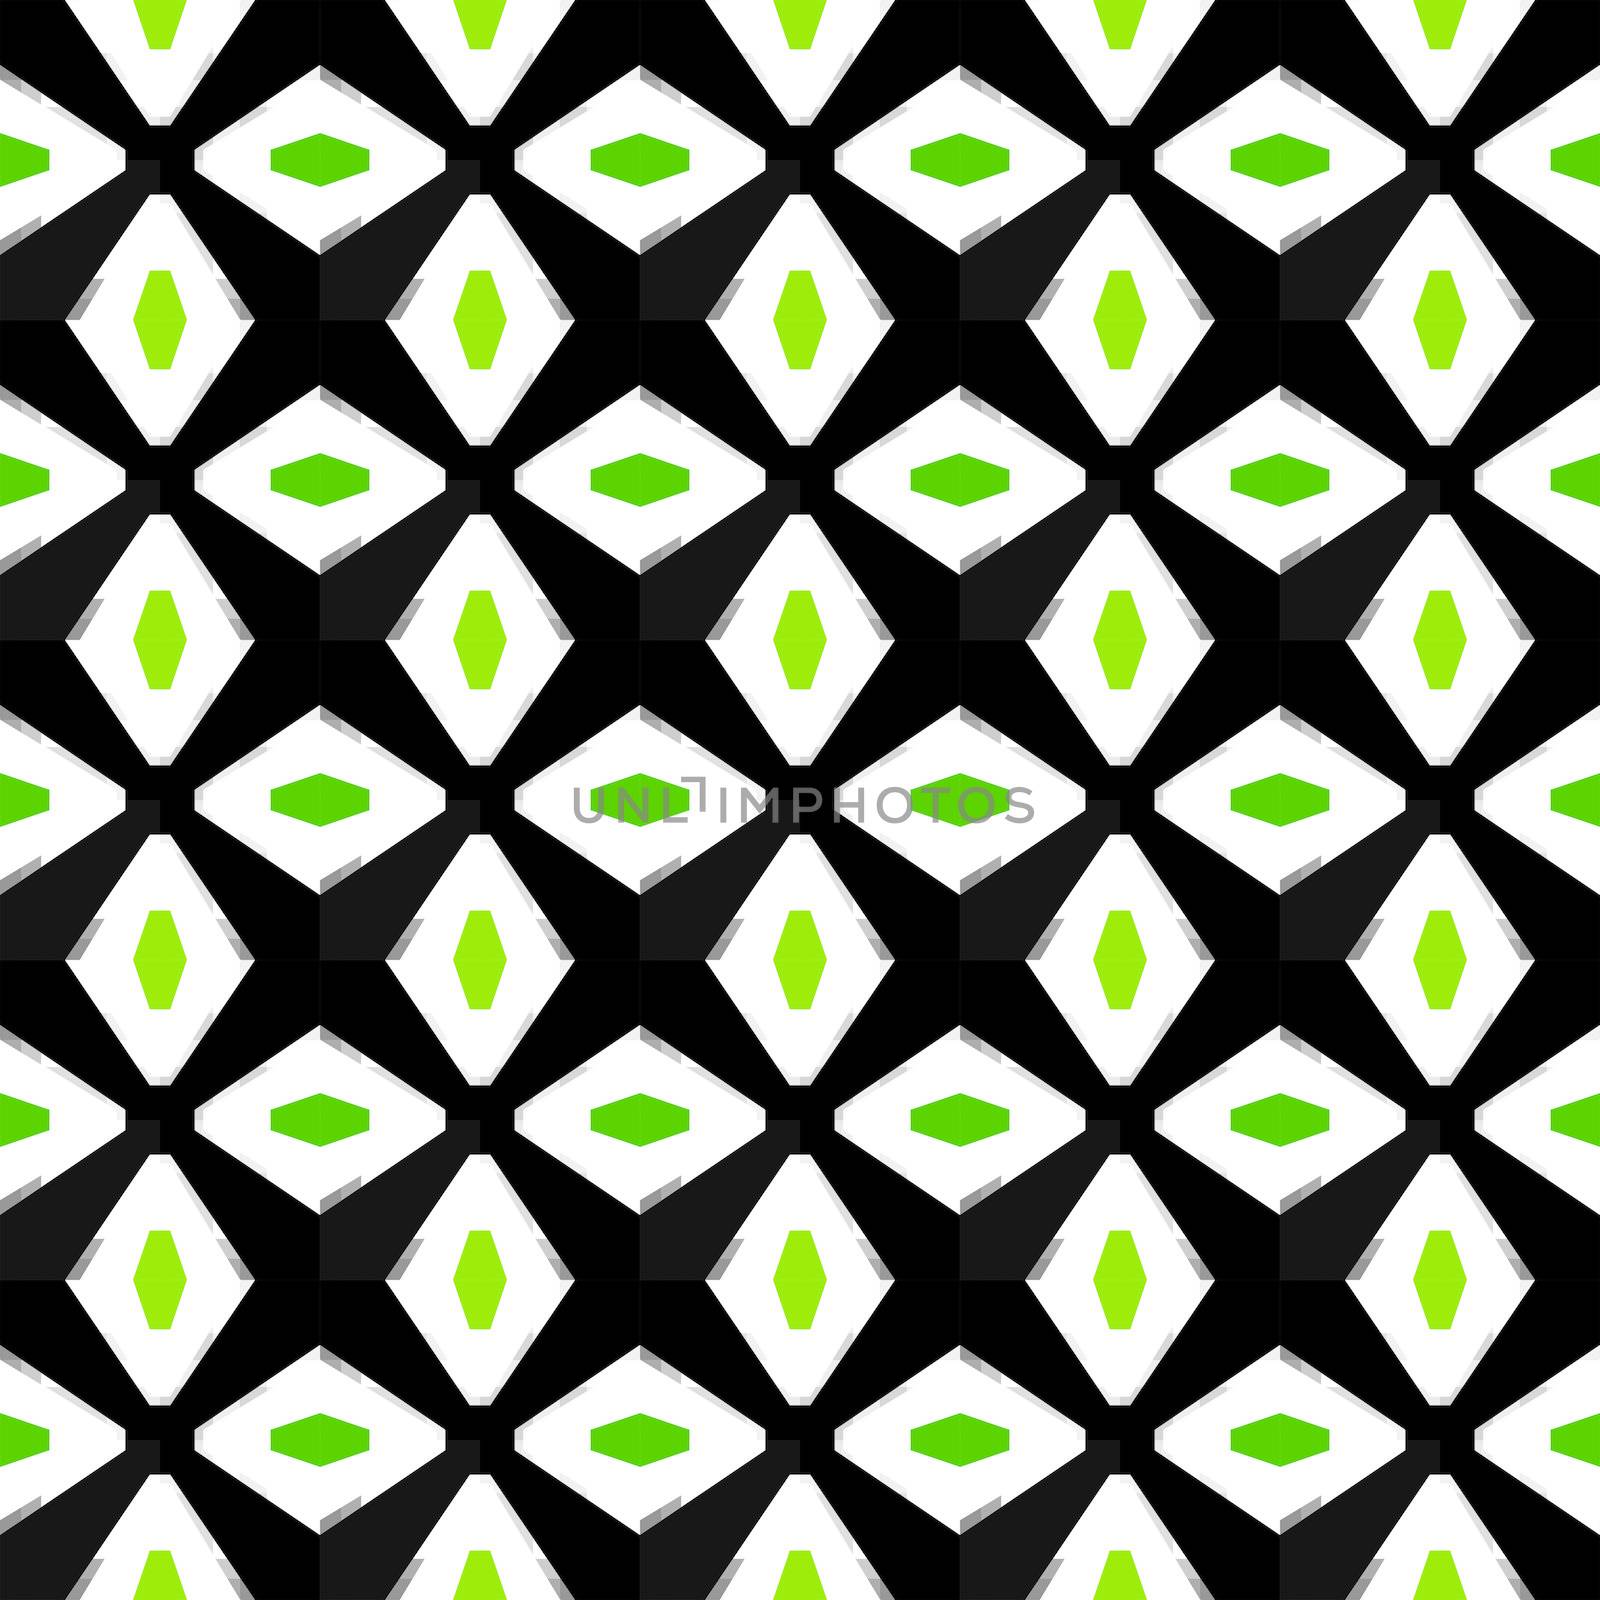 An abstract pattern with geomtric diamond shapes.